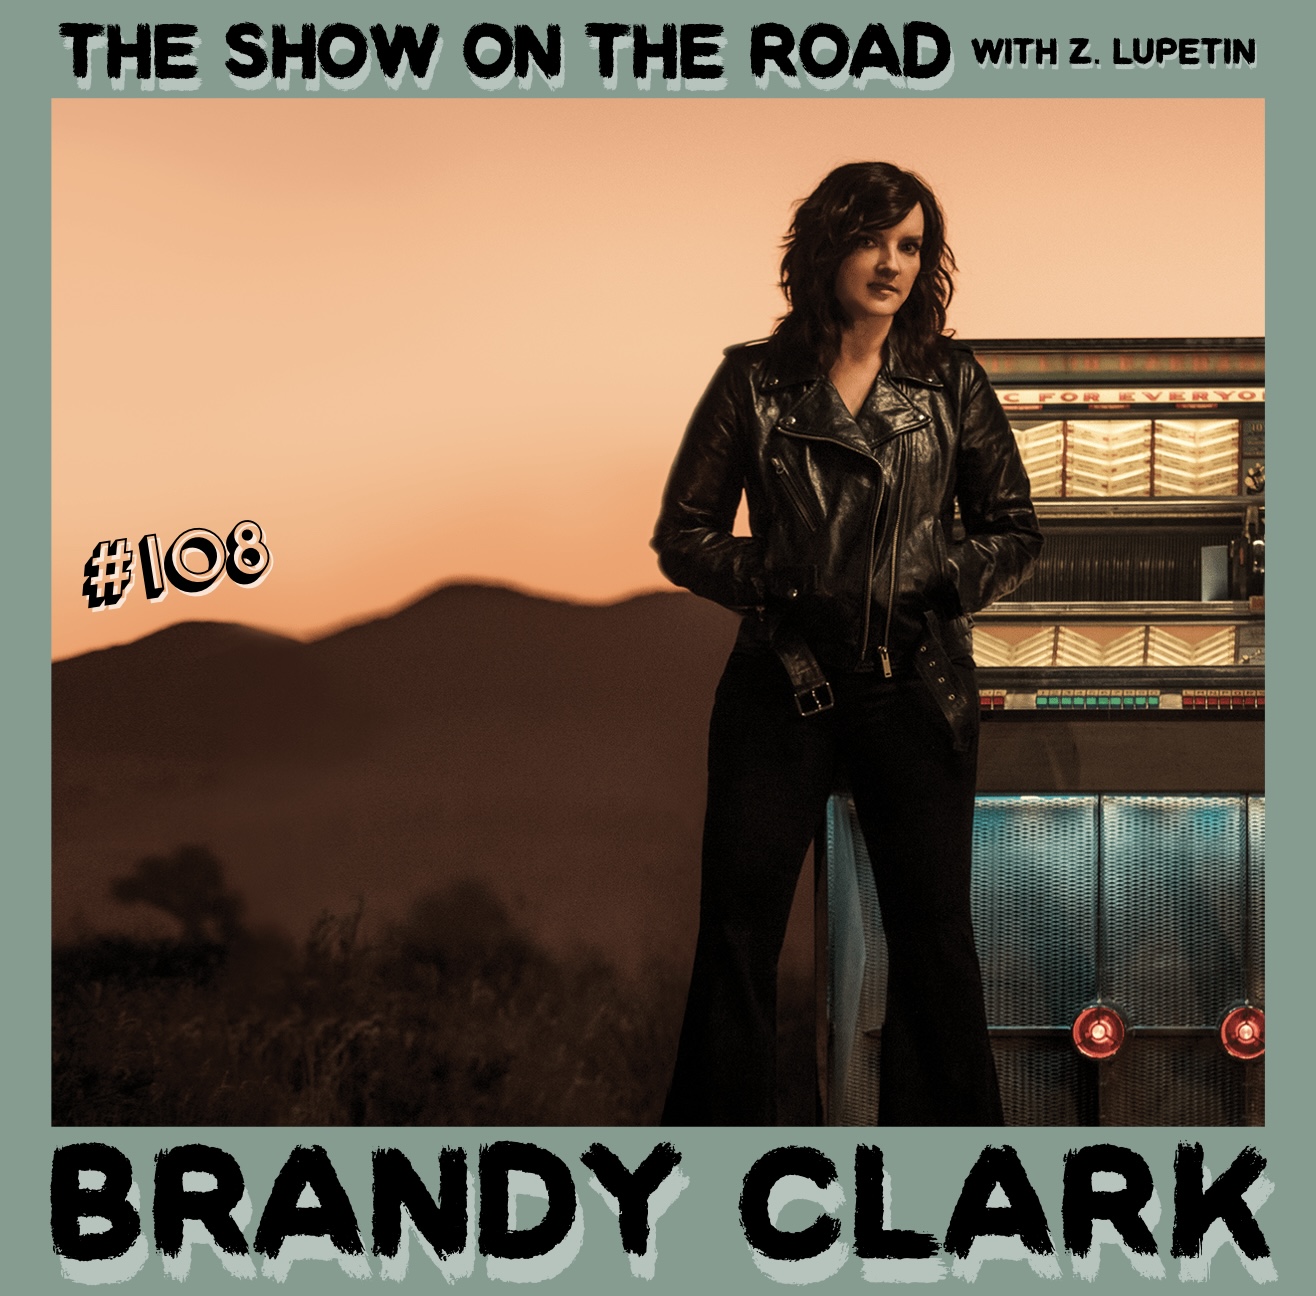 The Show on the Road - Brandy Clark